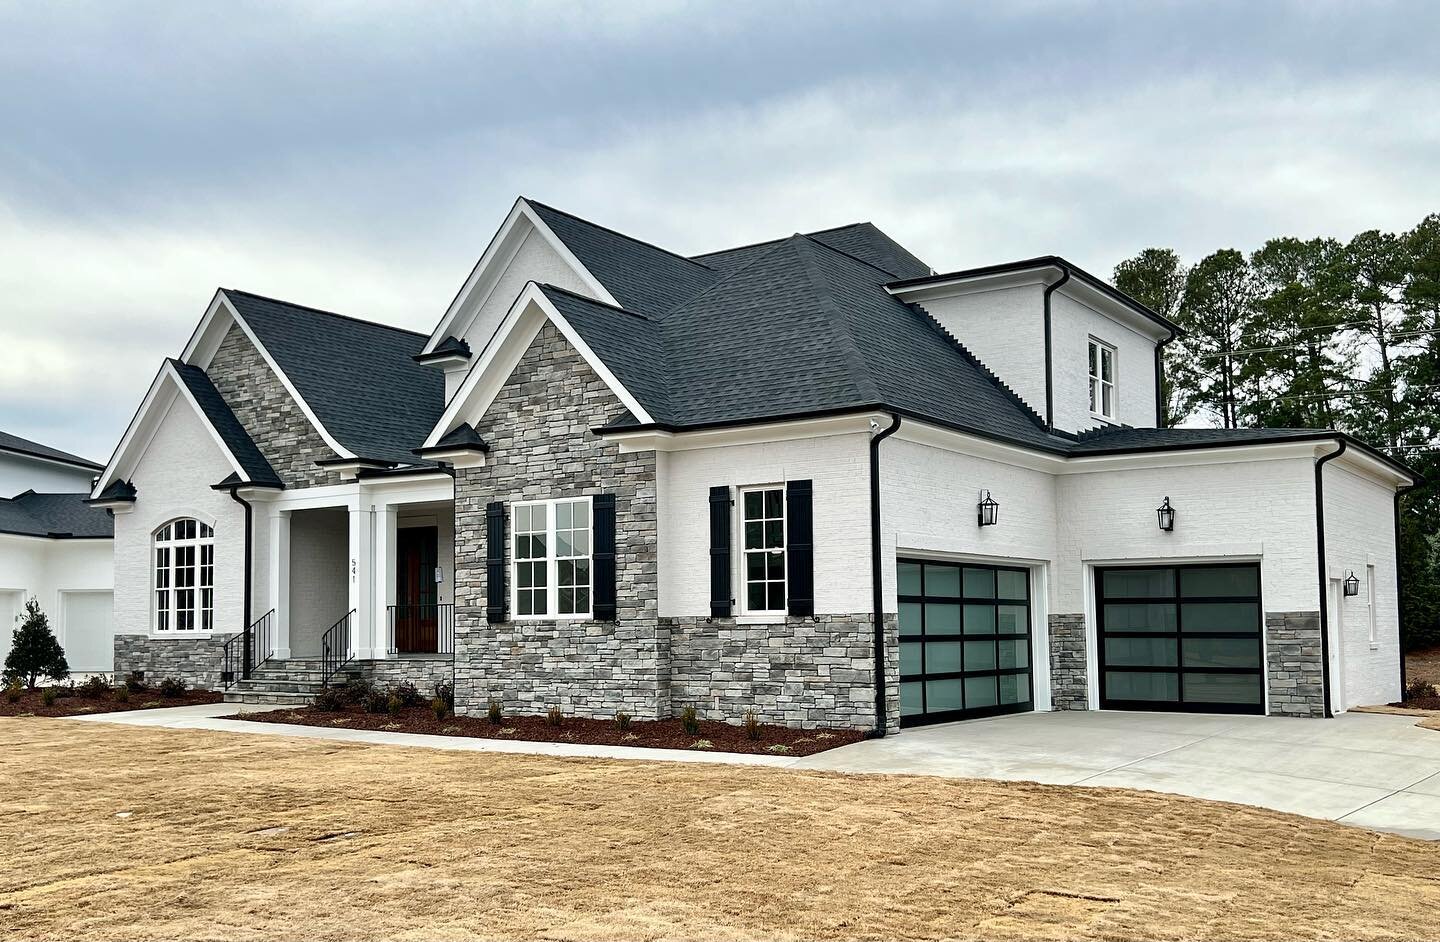 These beautiful glass garage doors added that classy, elegant touch we wanted for this Cary home. 🏡
&nbsp;
Follow us ➡️ @oconnelldeveloping
www.oconnelldeveloping.com

Garage doors- 
@carolinagaragedoorspecialist

#customhome #customhomes #newhome #